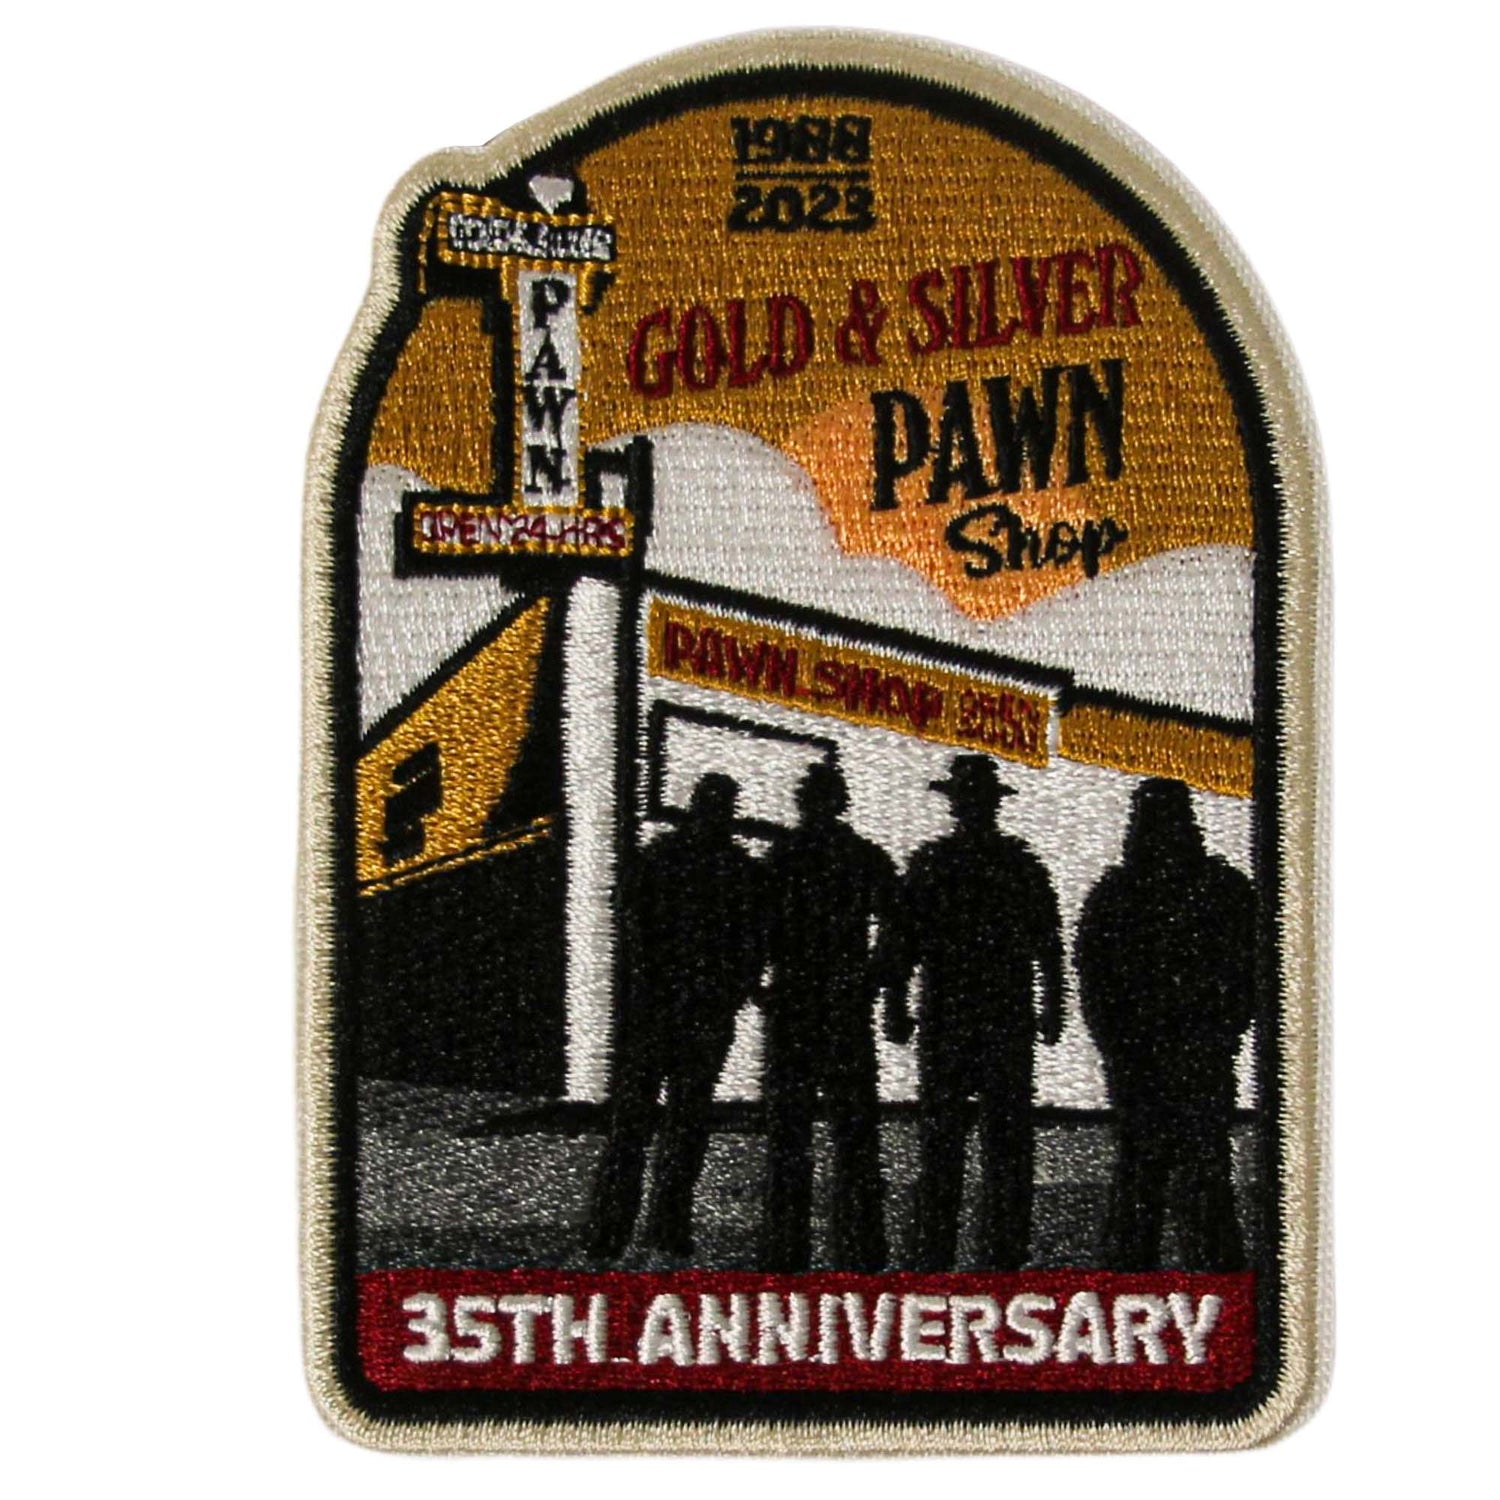 The World Famous Gold & Silver Pawn Shop Patches Yellow Sky